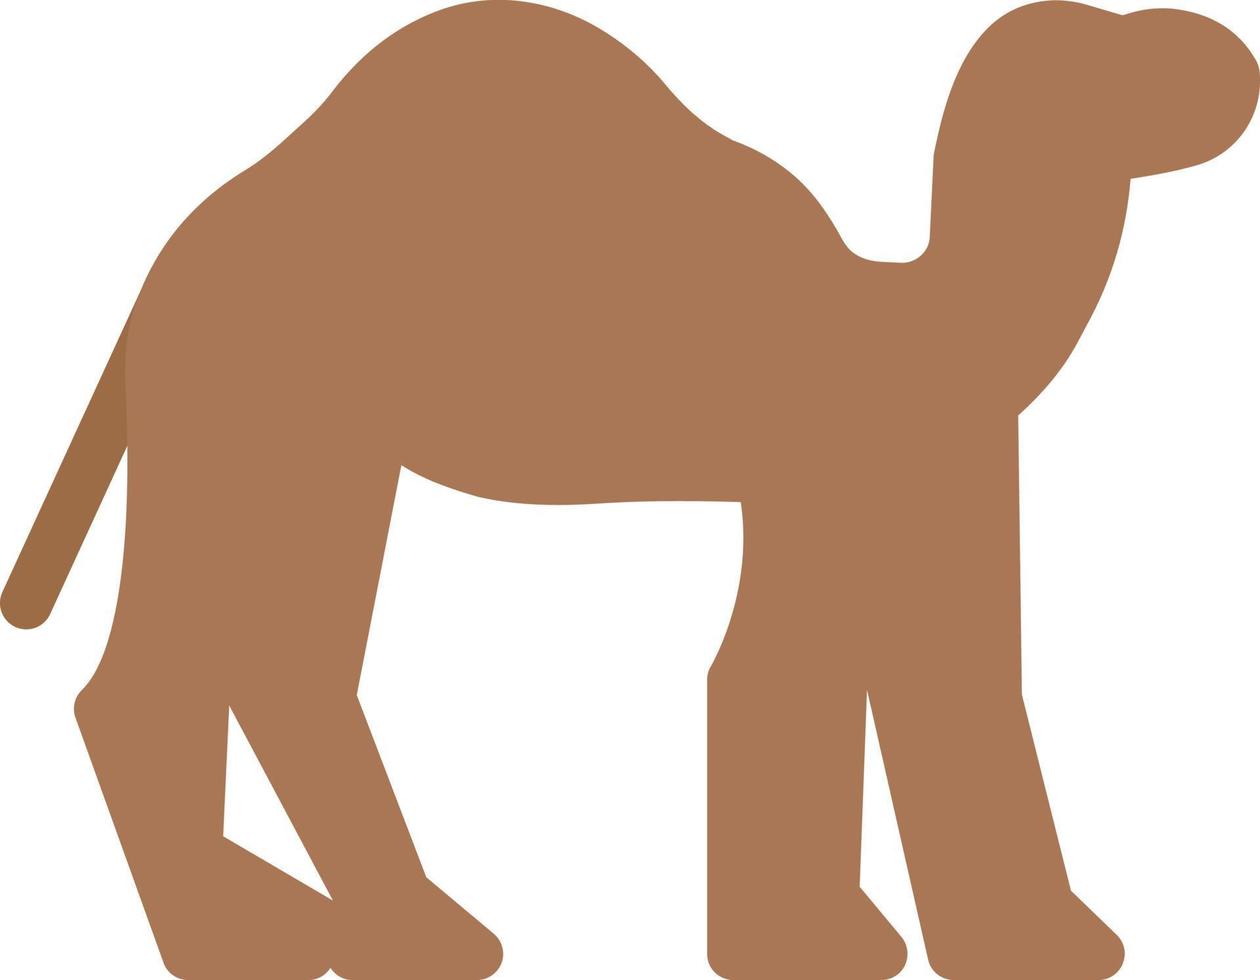 camel vector illustration on a background.Premium quality symbols.vector icons for concept and graphic design.